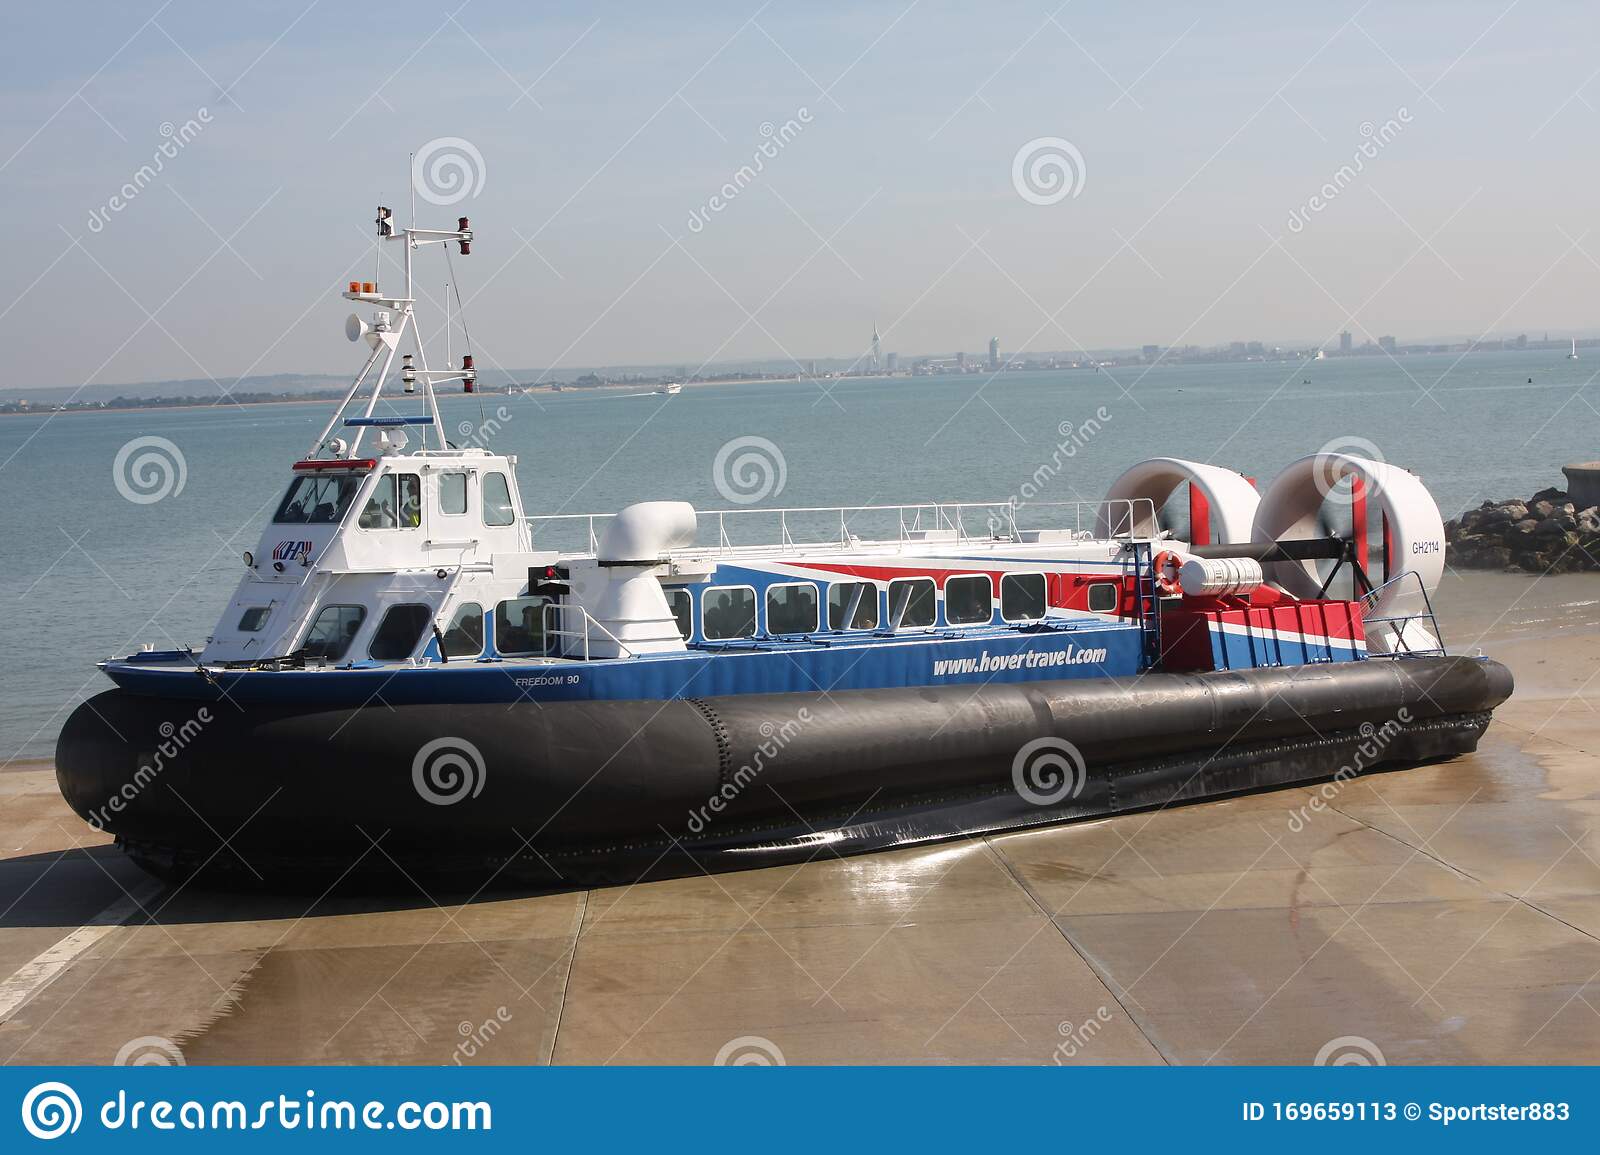 how does a hovercraft hover across the water